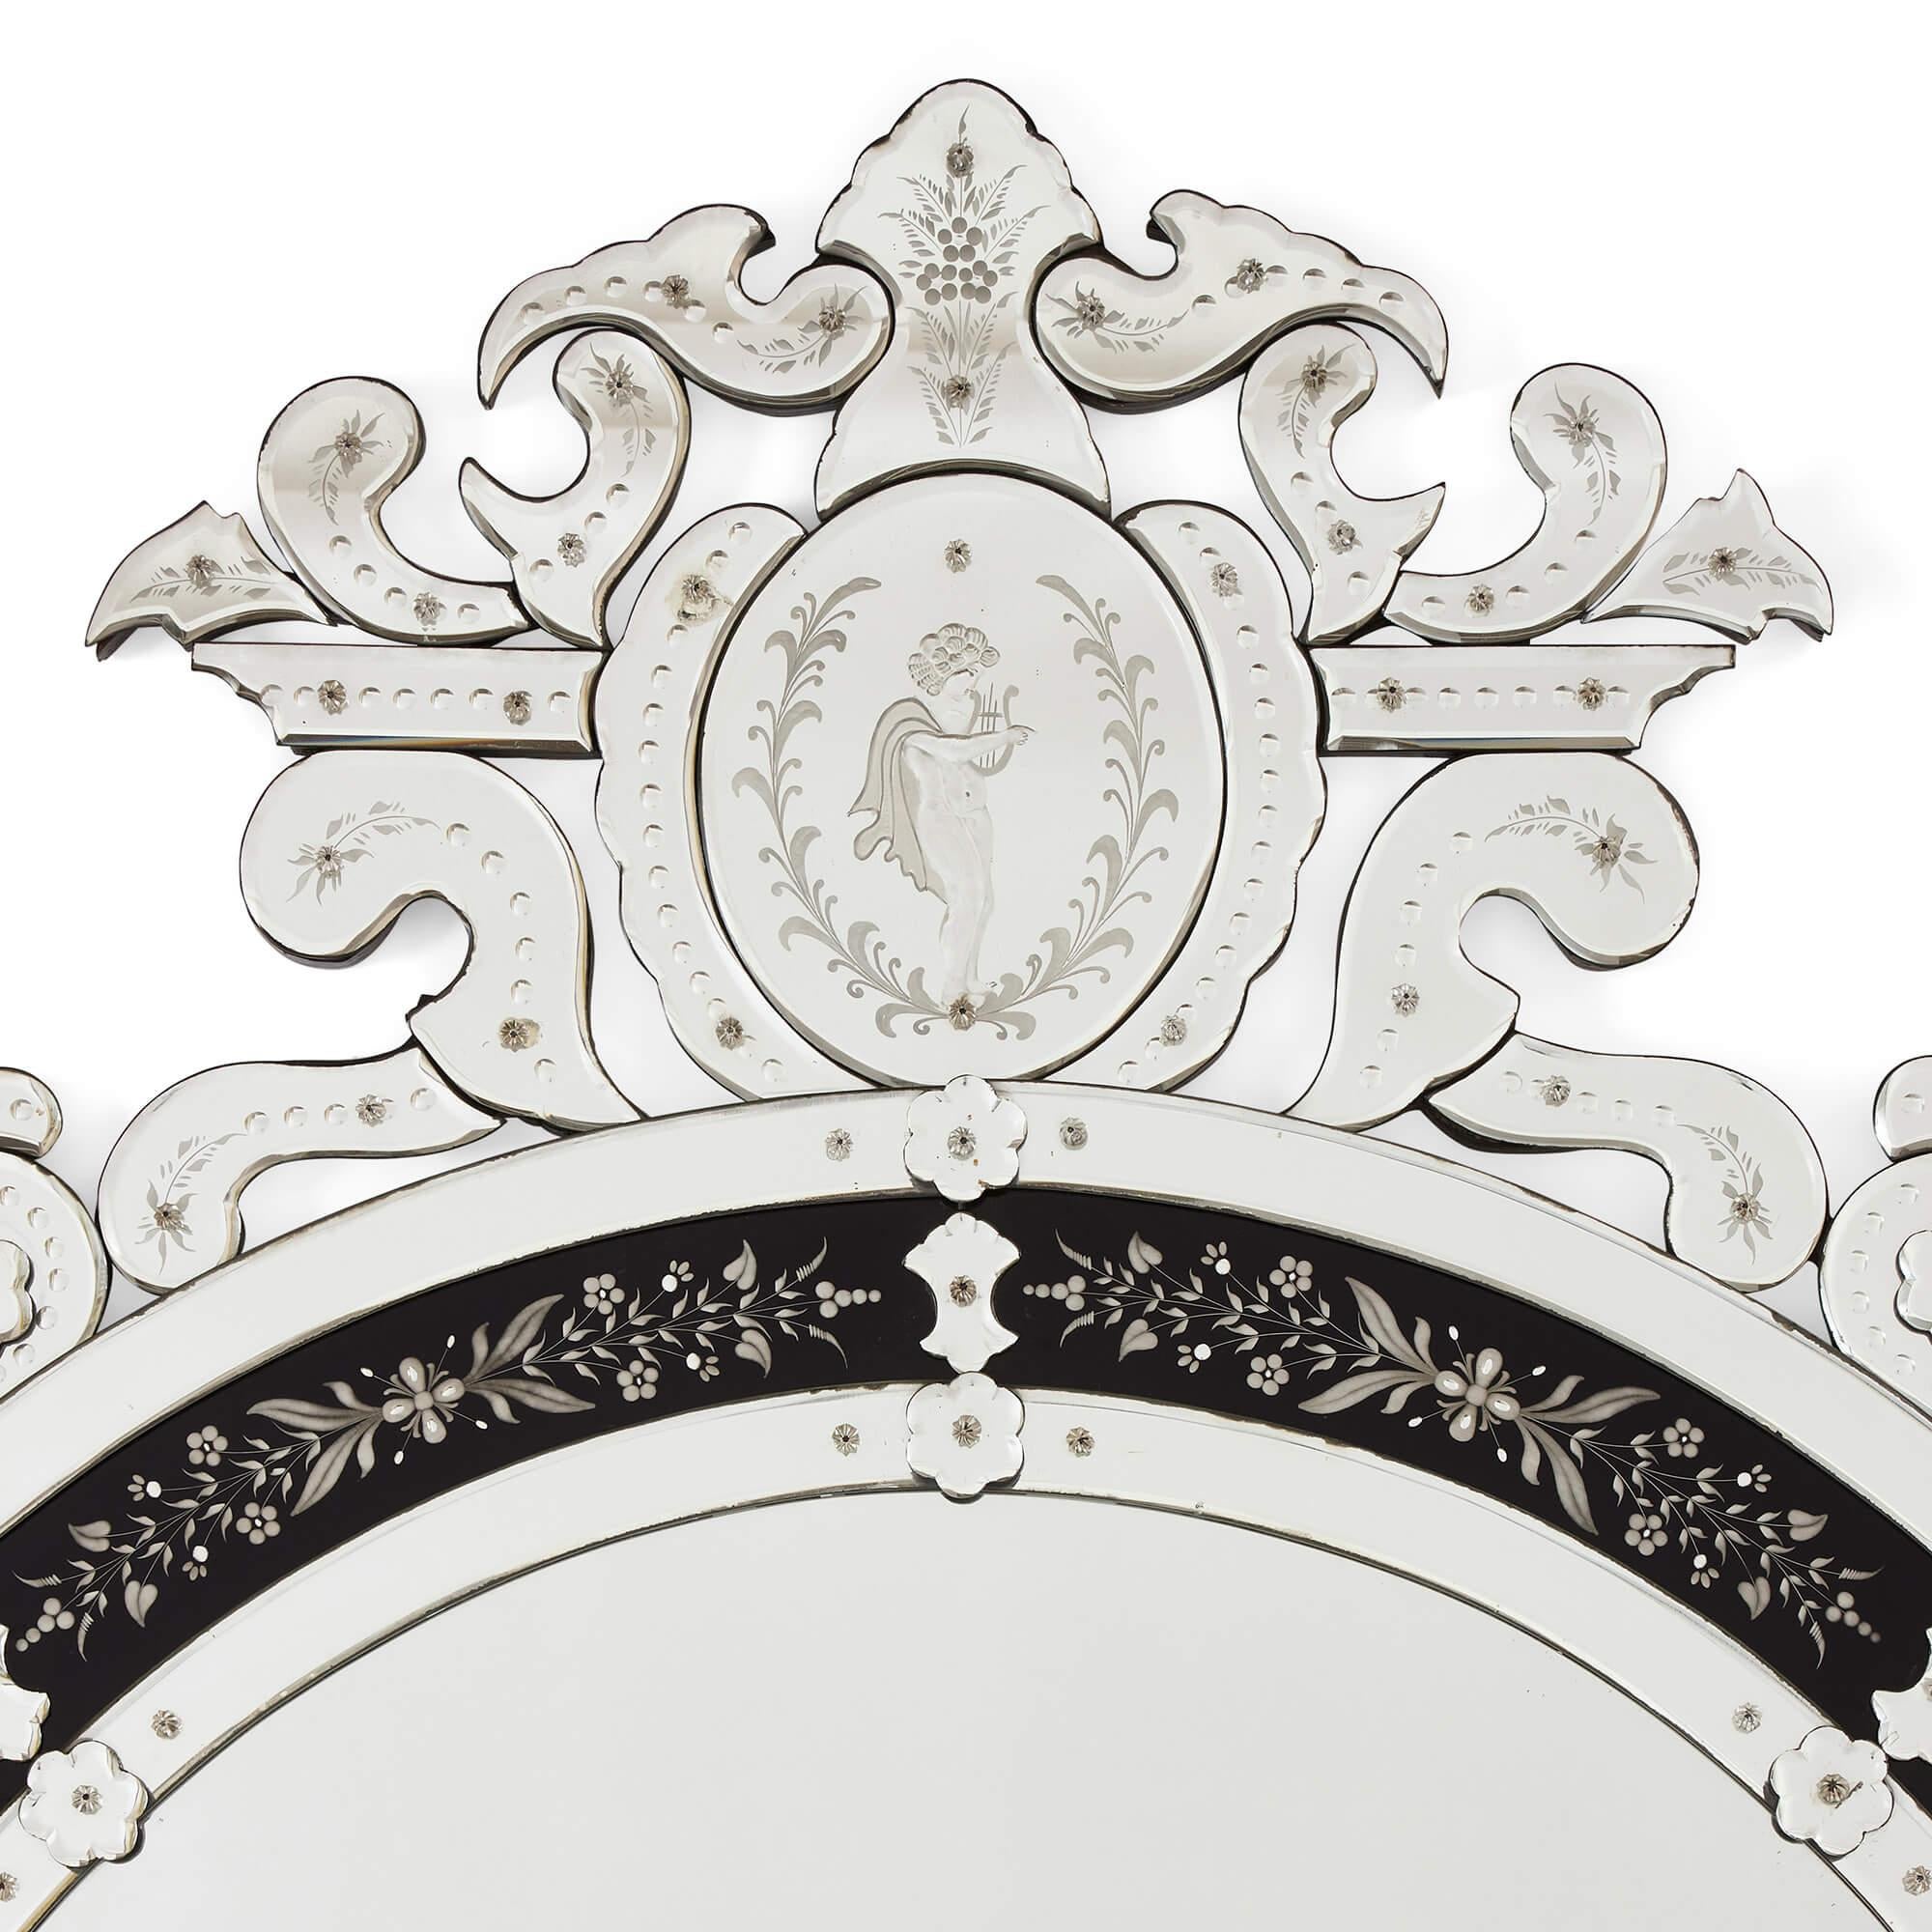 Very large Venetian glass mirror with engraved decoration
Italian, 20th Century
Height 220cm, width 124cm, depth 4cm

This monumental Venetian glass mirror boasts impressive detailing on both the crest and tail which hug the central oval, creating a